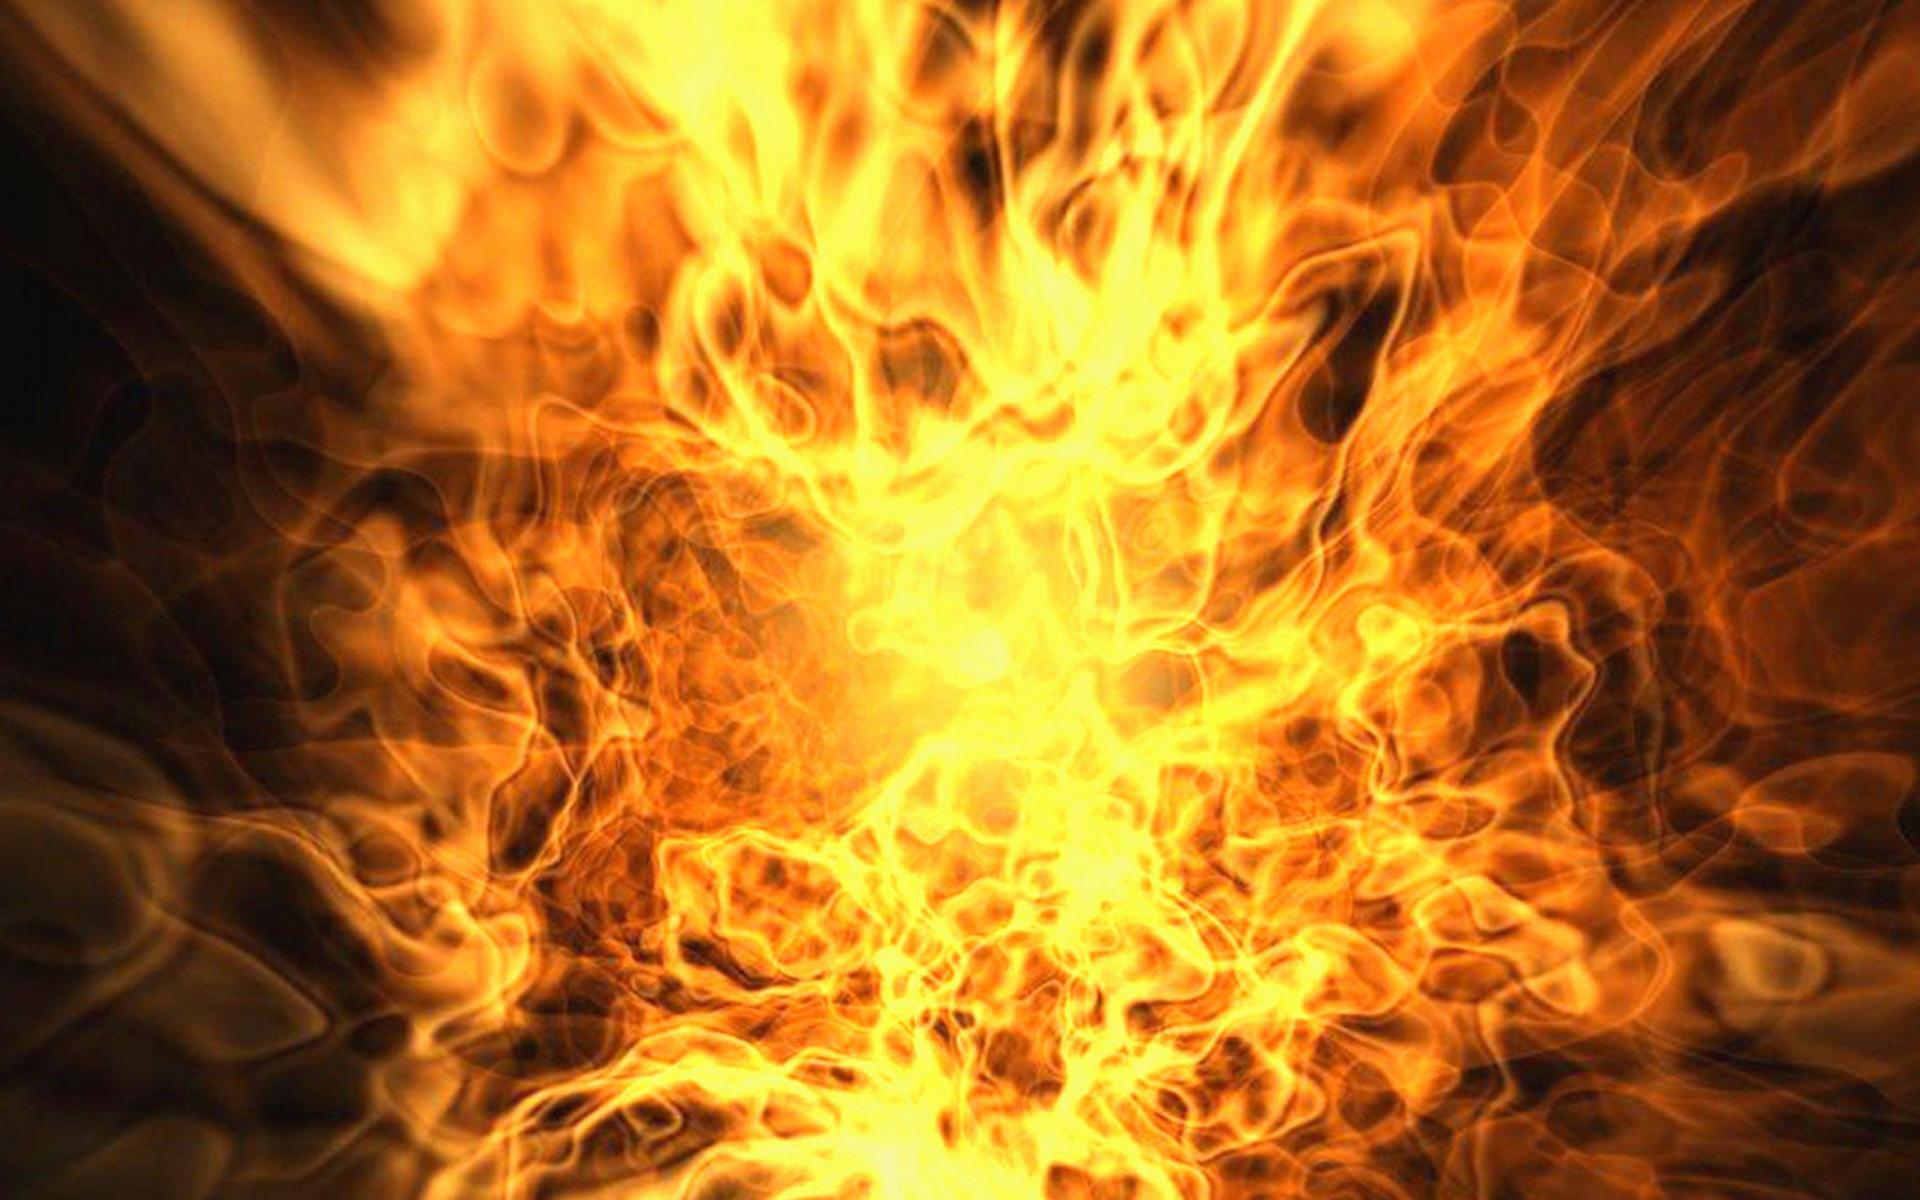 fire images free download